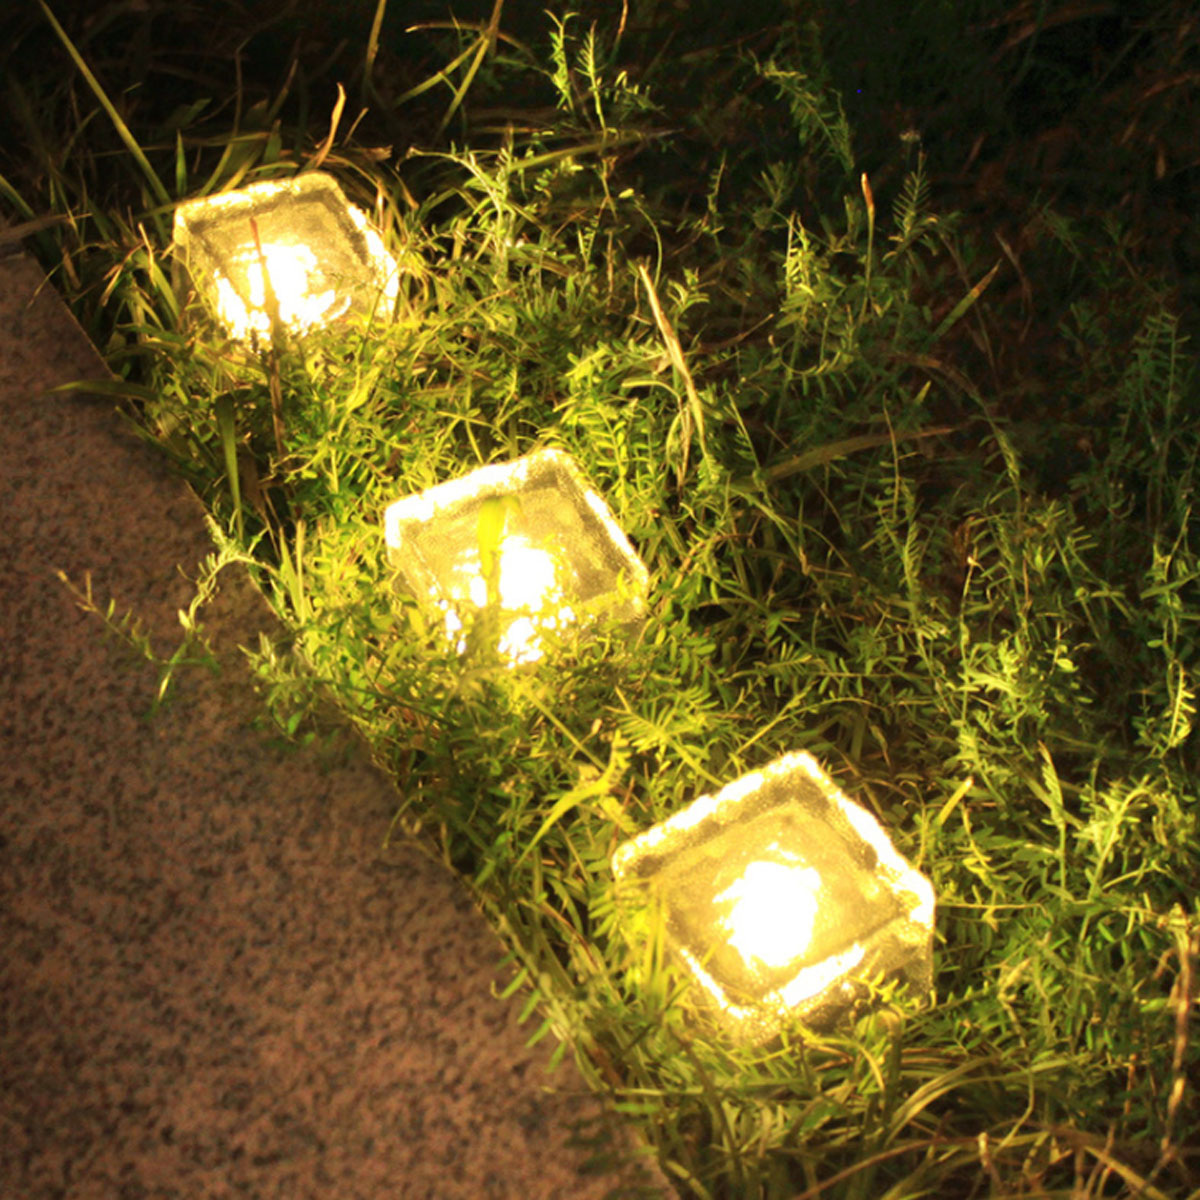 LED-Solar-Power-Buried-Light-Waterproof-Ice-Cube-Ground-Lawn-Lamp-Outdoor-Path-Garden-Deck-Lighting-1730821-7